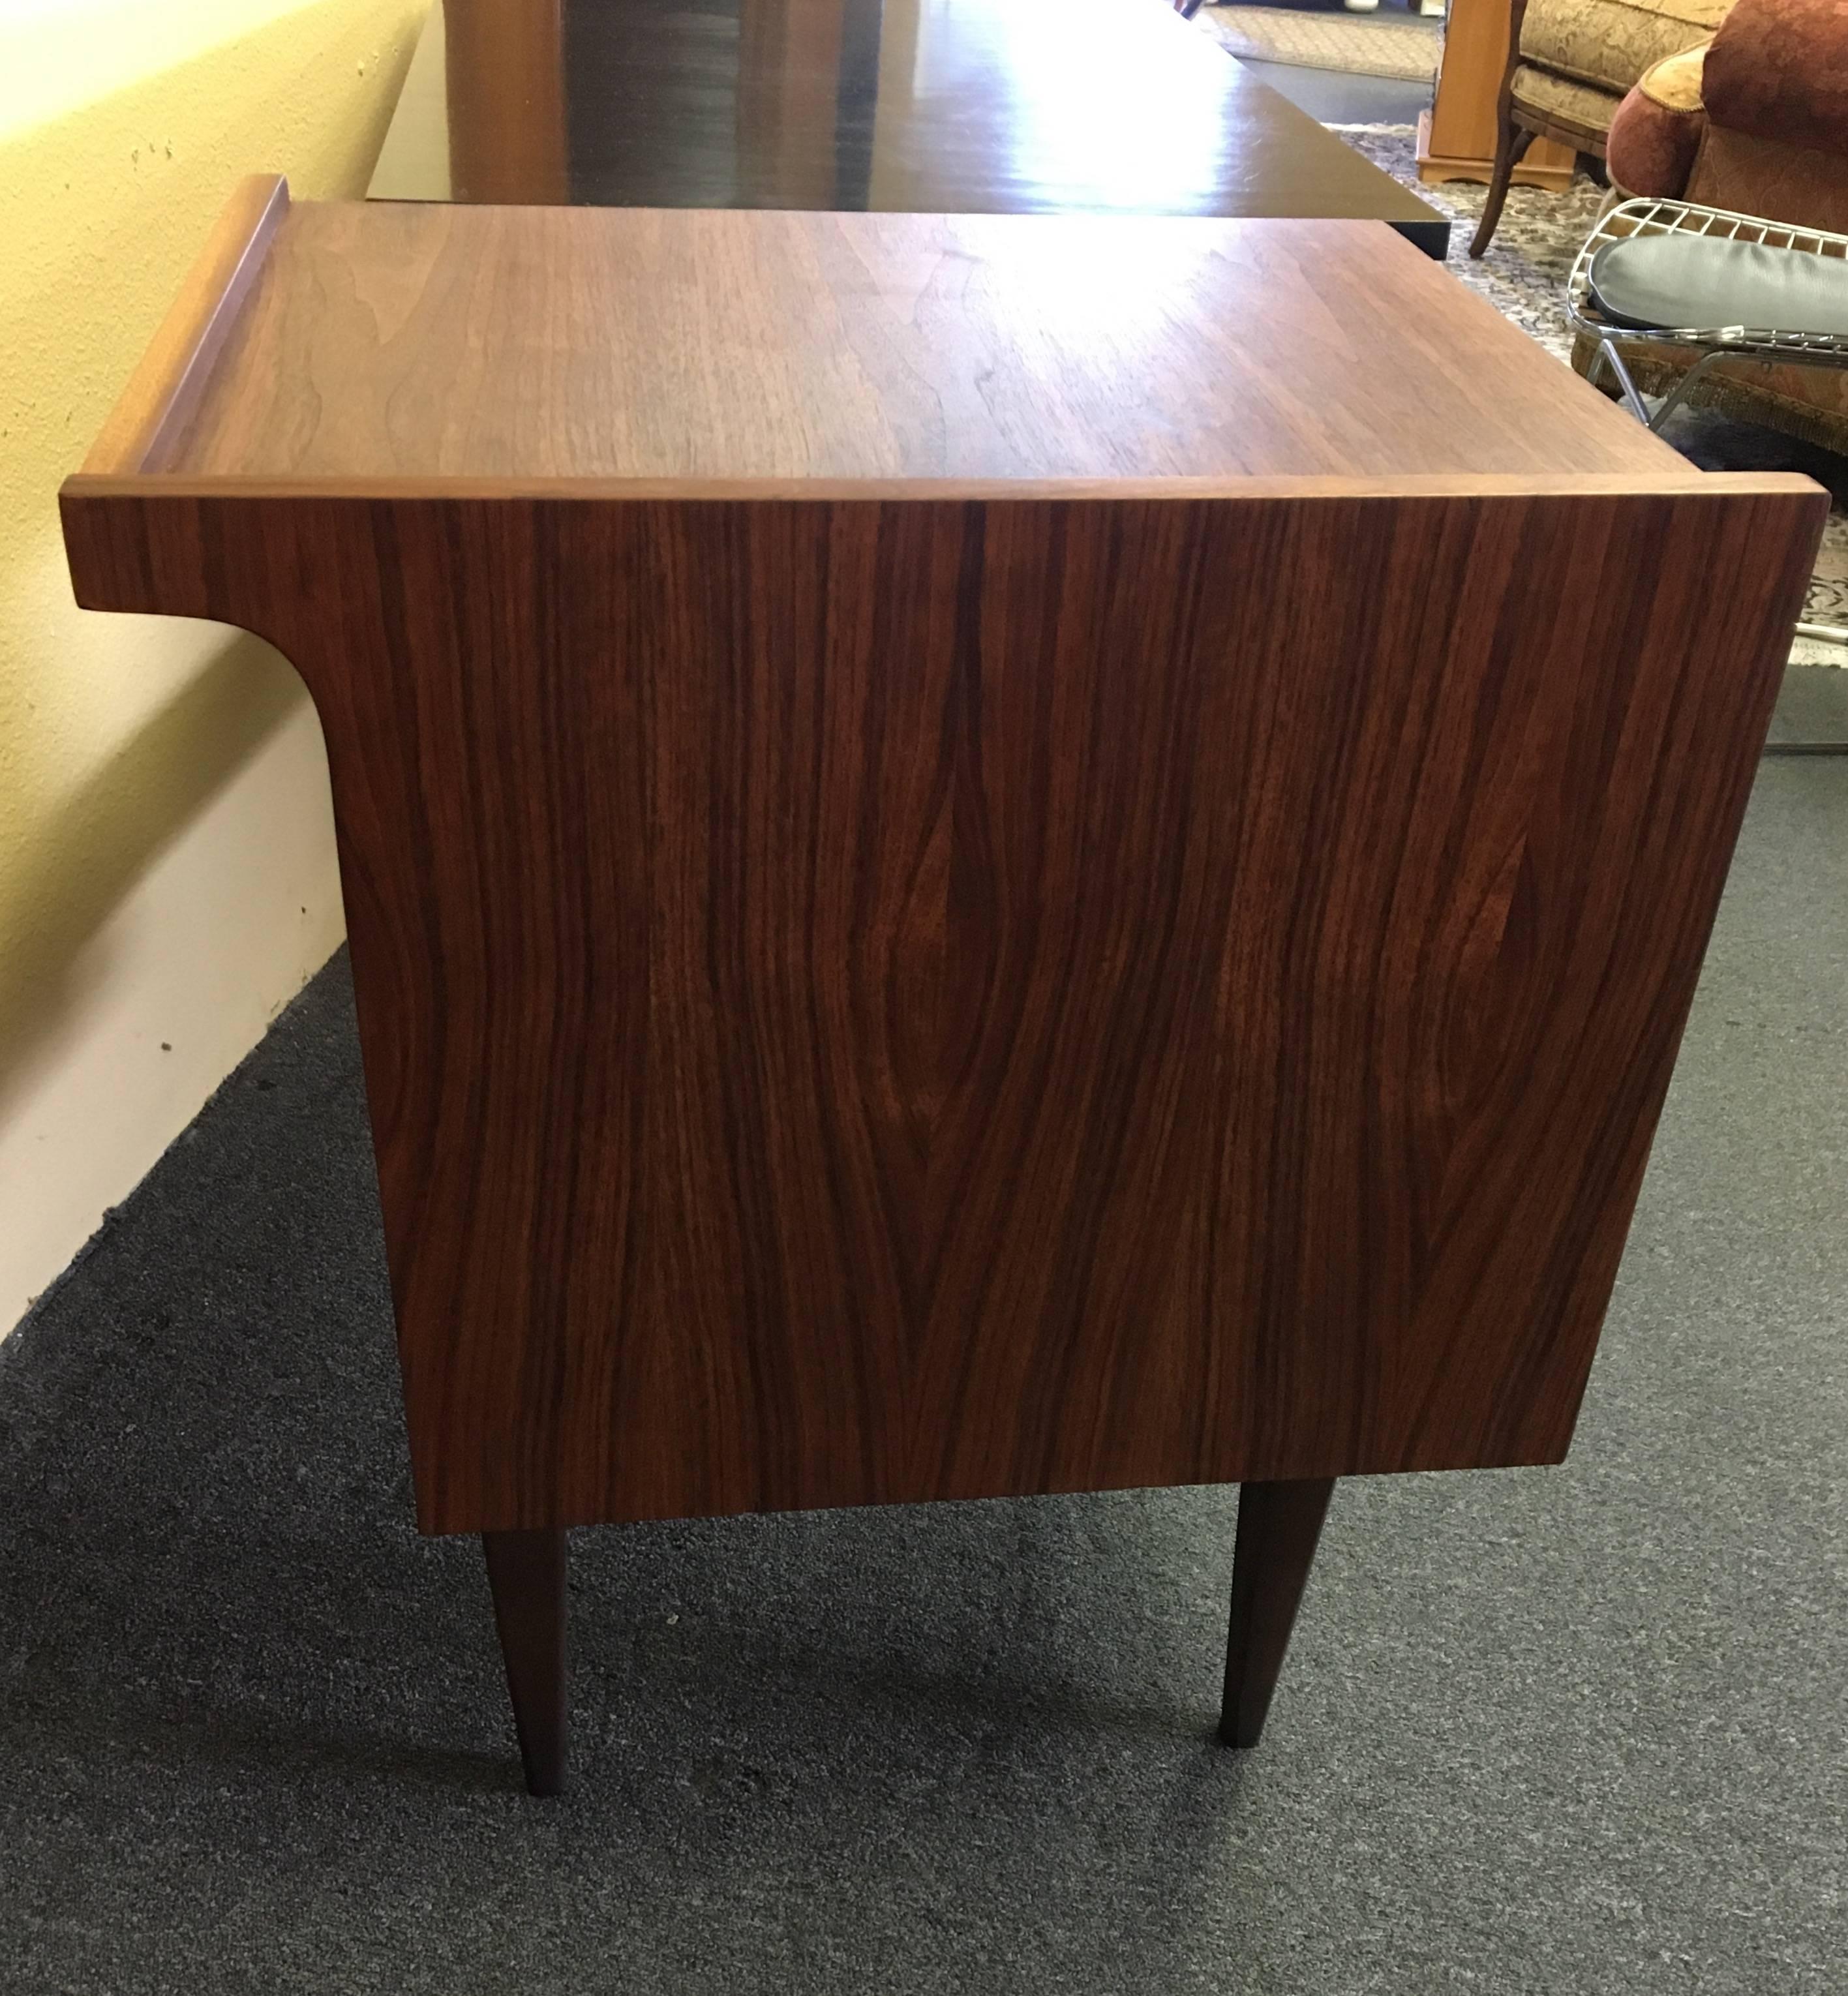 Versatile double sided desk by Hooker, circa 1950s. The desk has a black laminated top with three drawers (one being a large file drawer) and back side with low bookshelf and black enameled handles. The piece is from the "Mainline"